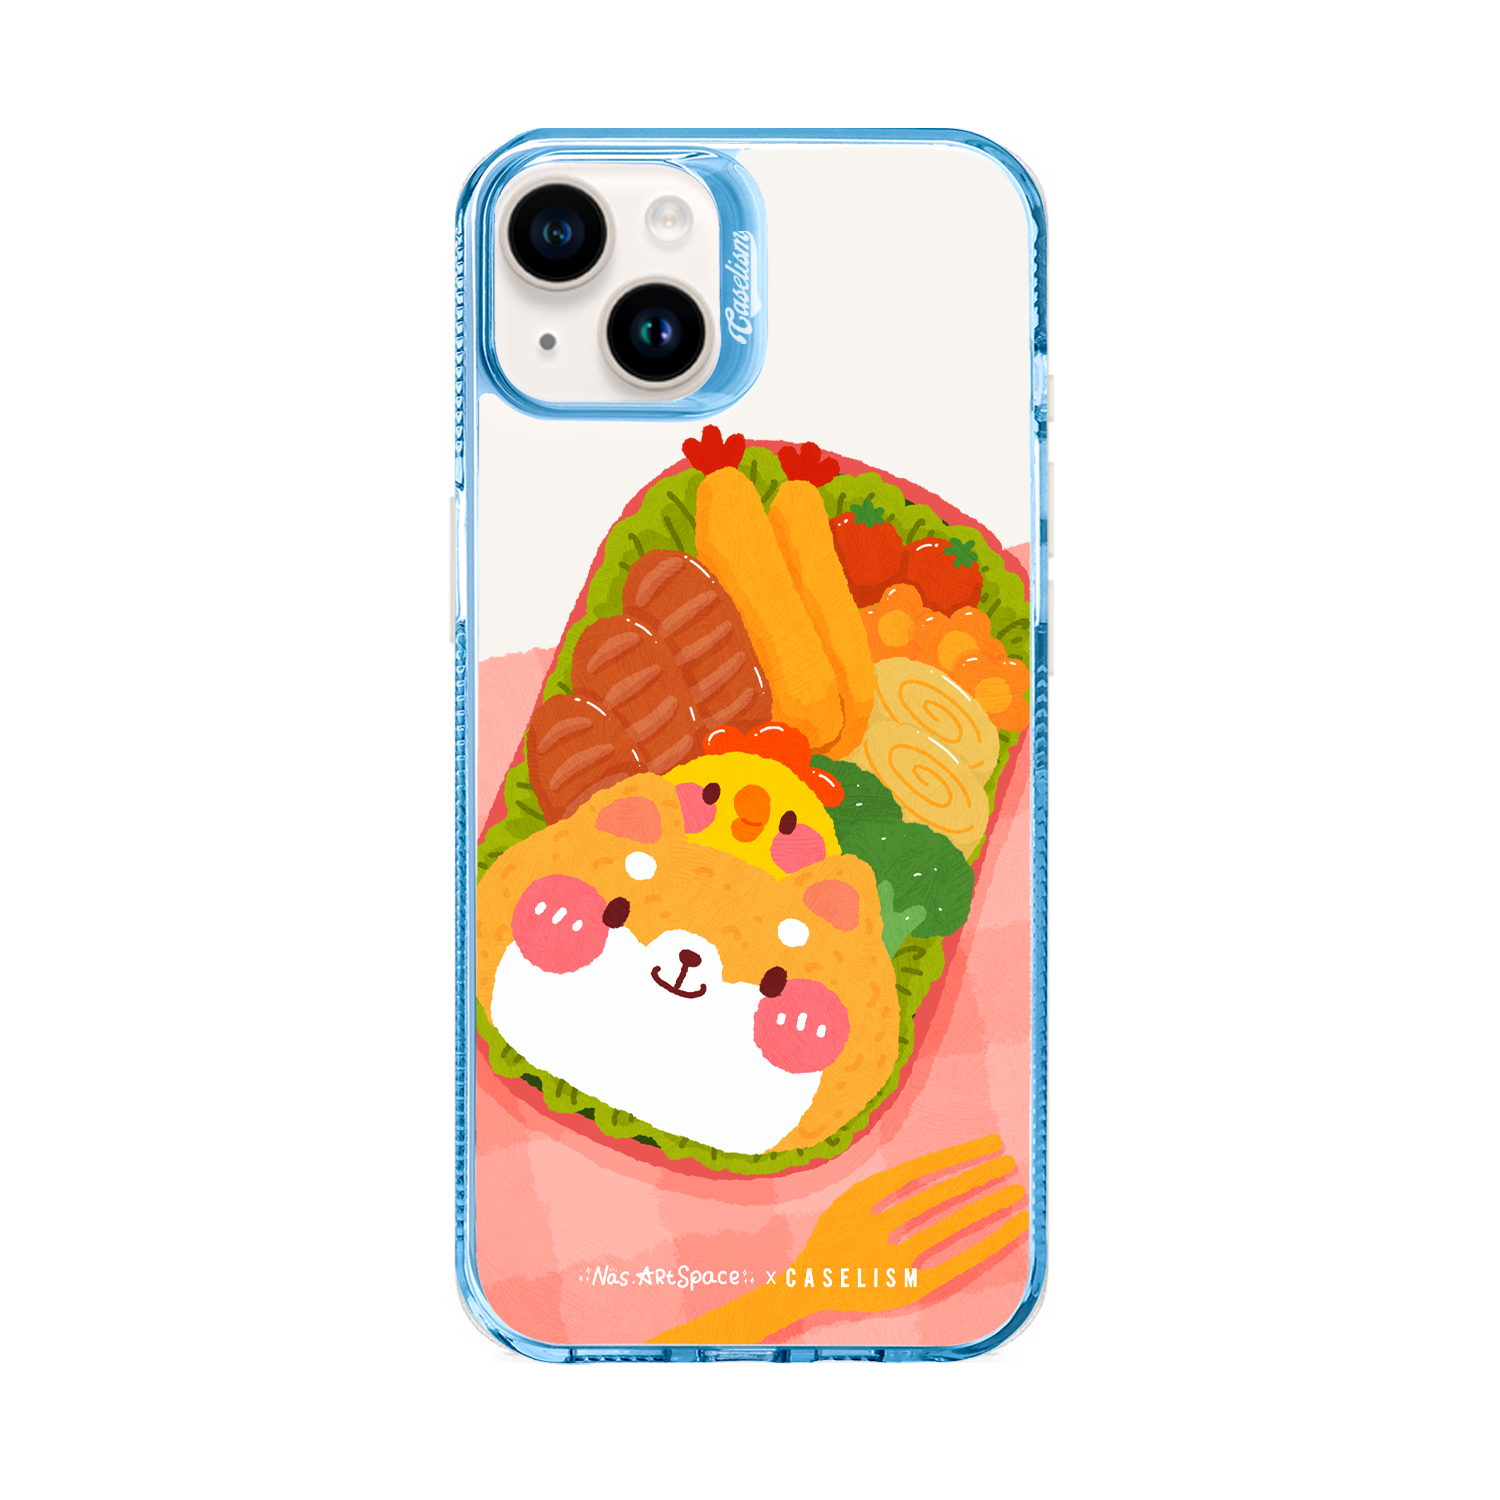 NART005 - ColorLite Case for iPhone